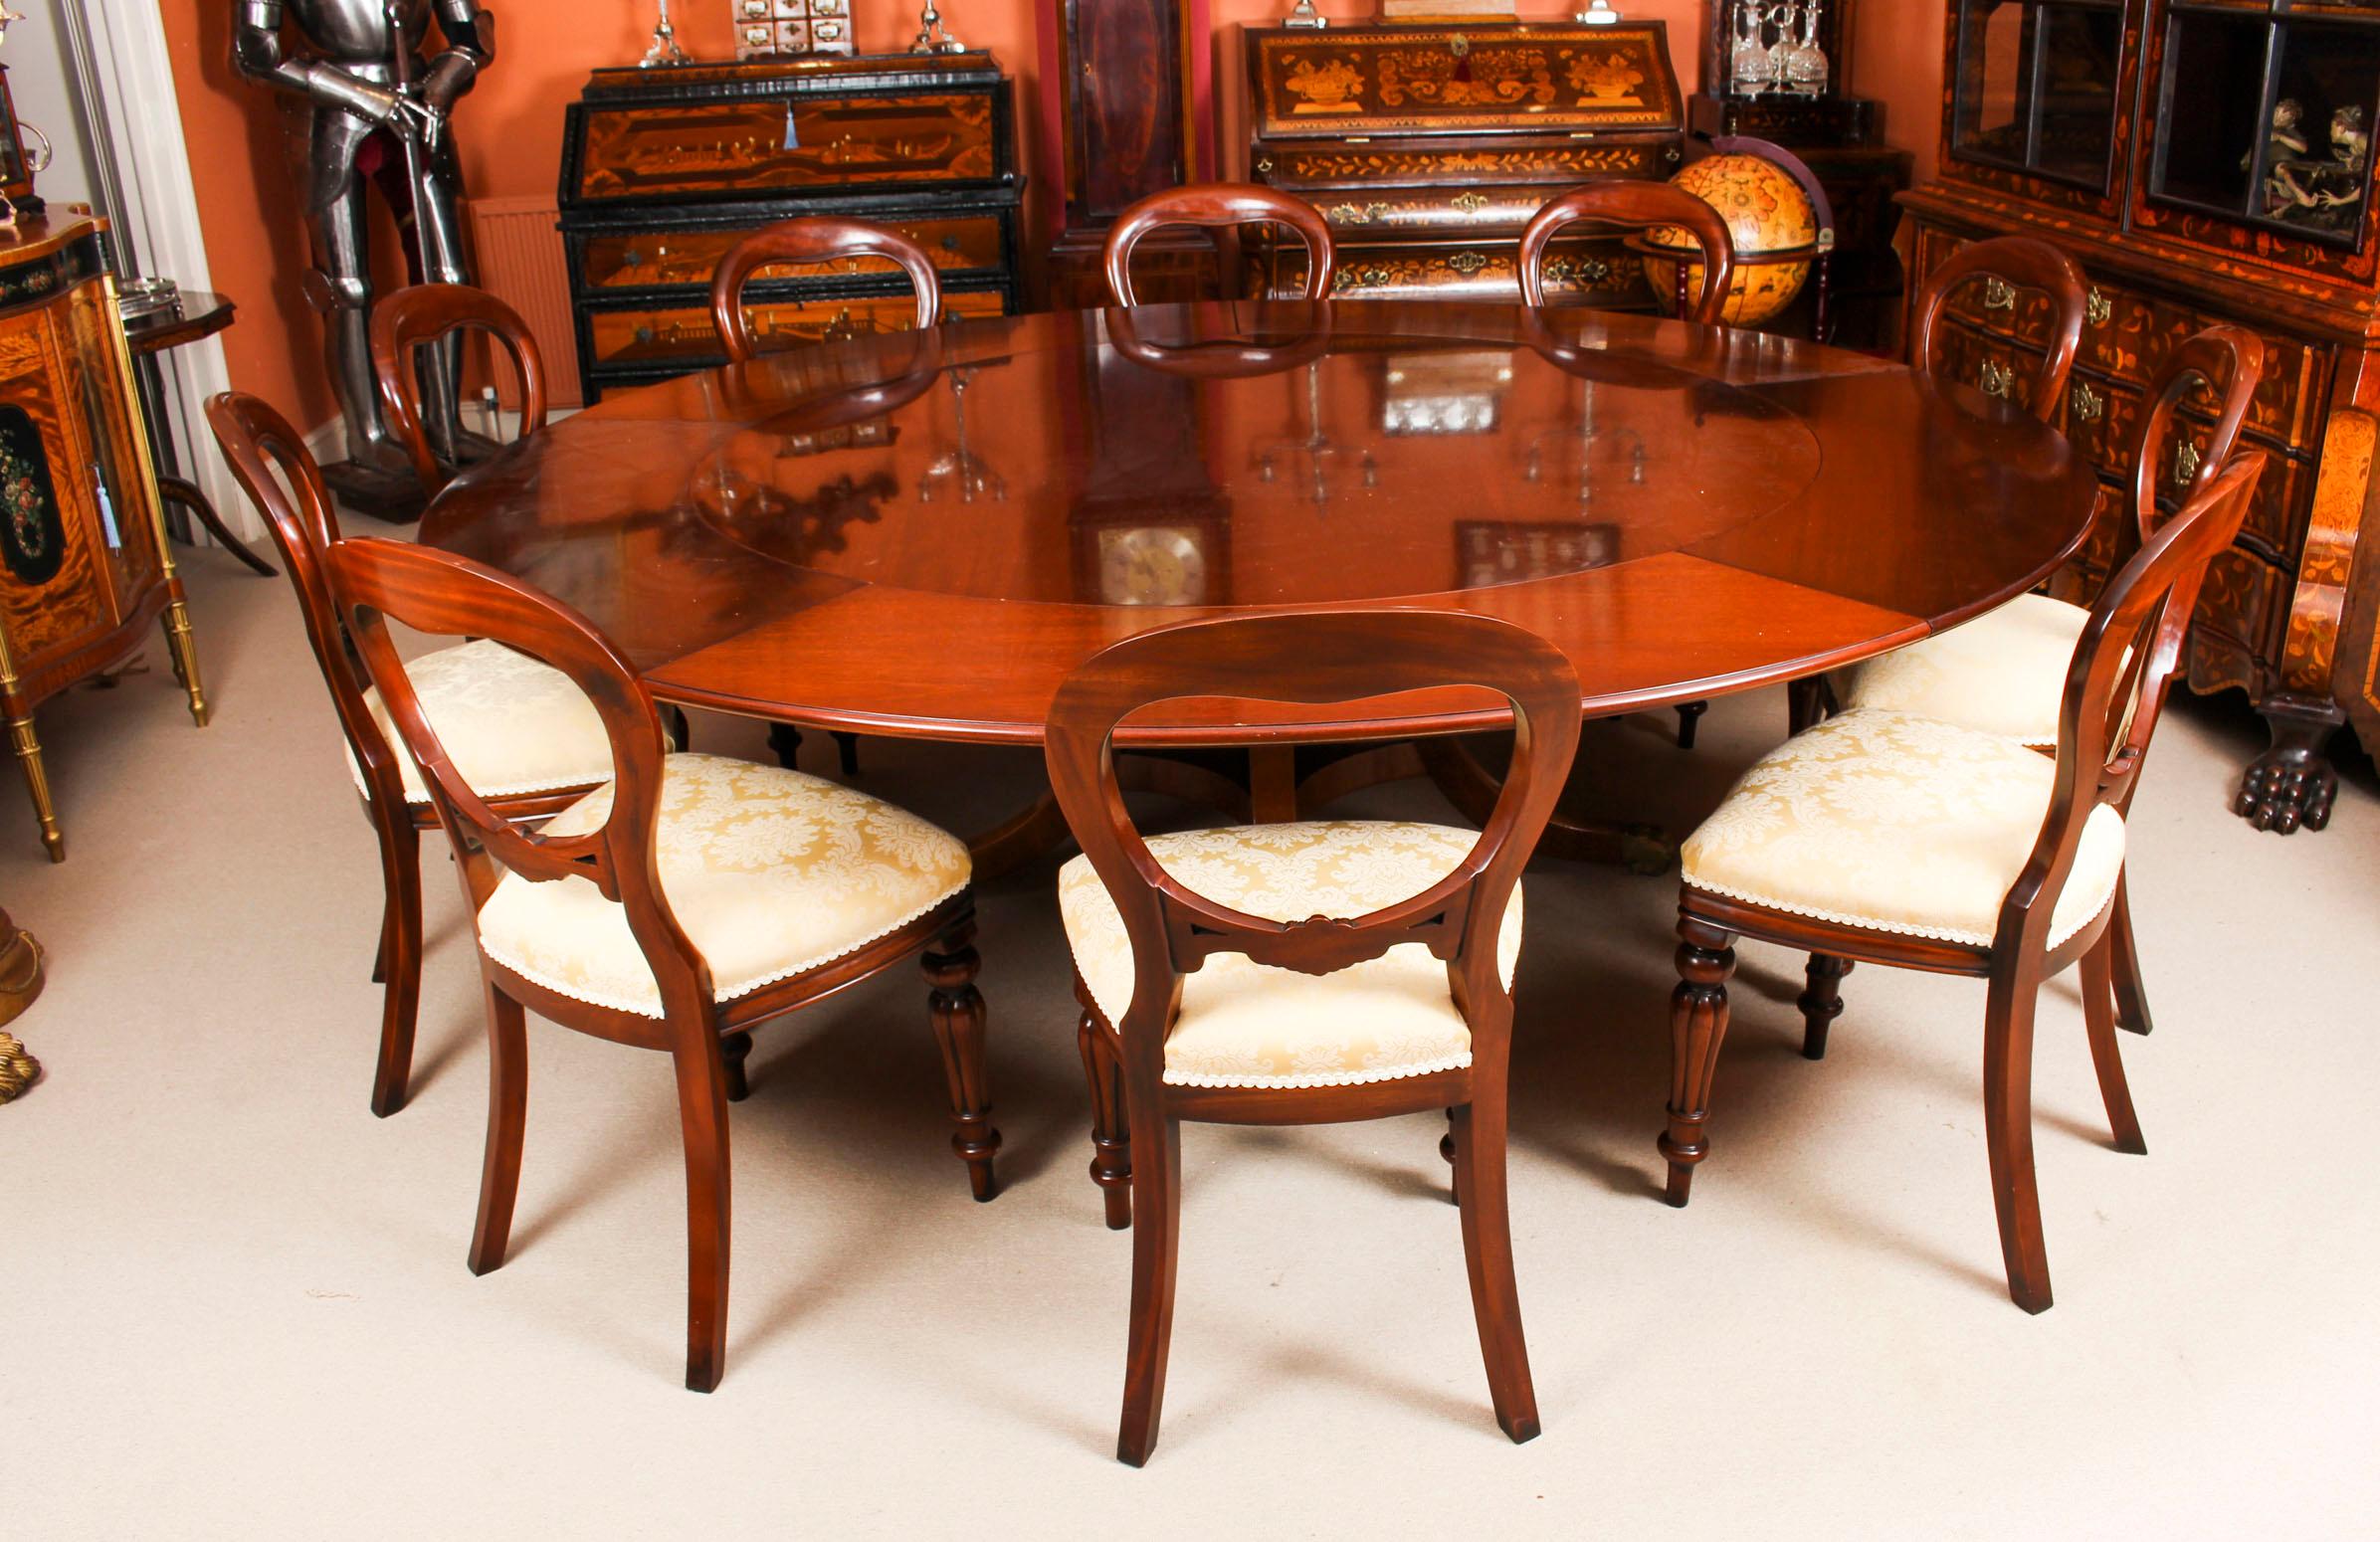 This is a gorgeous Regency revival Jupe style flame mahogany dining table by the master cabinet maker William Tillman, circa 1970 in date.
 
The table has a solid mahogany top that has five additional perimeter leaves that can be added around the